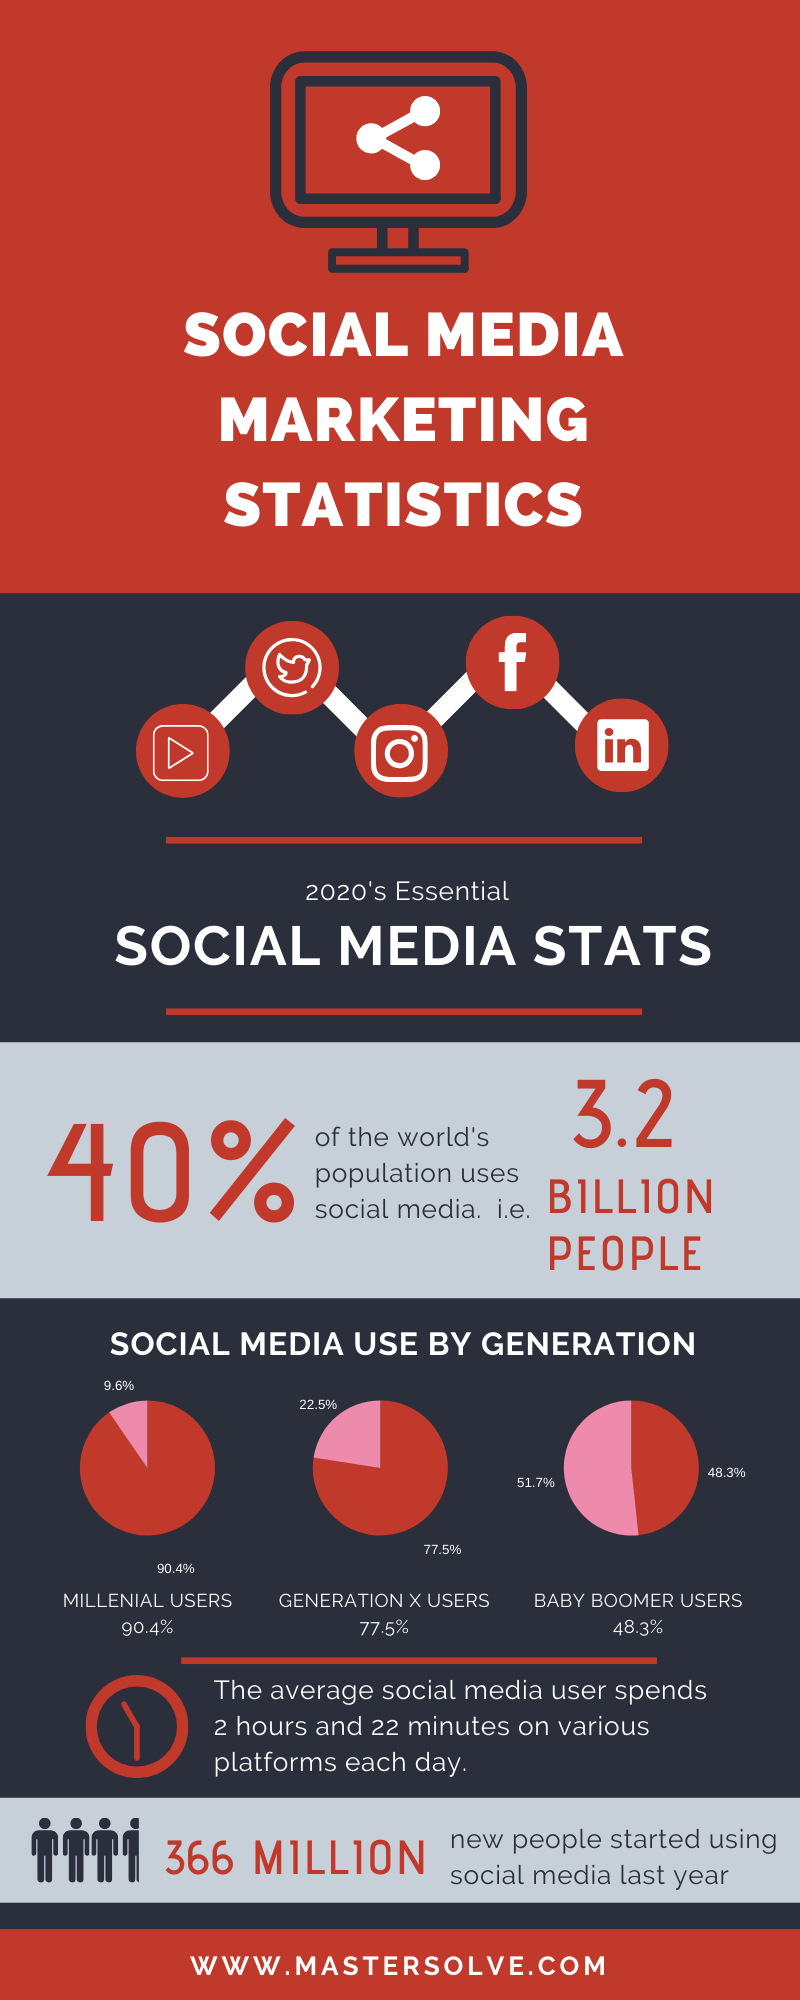 Social Media Facts to Guide Your Marketing Strategy - MasterSolve Inc.